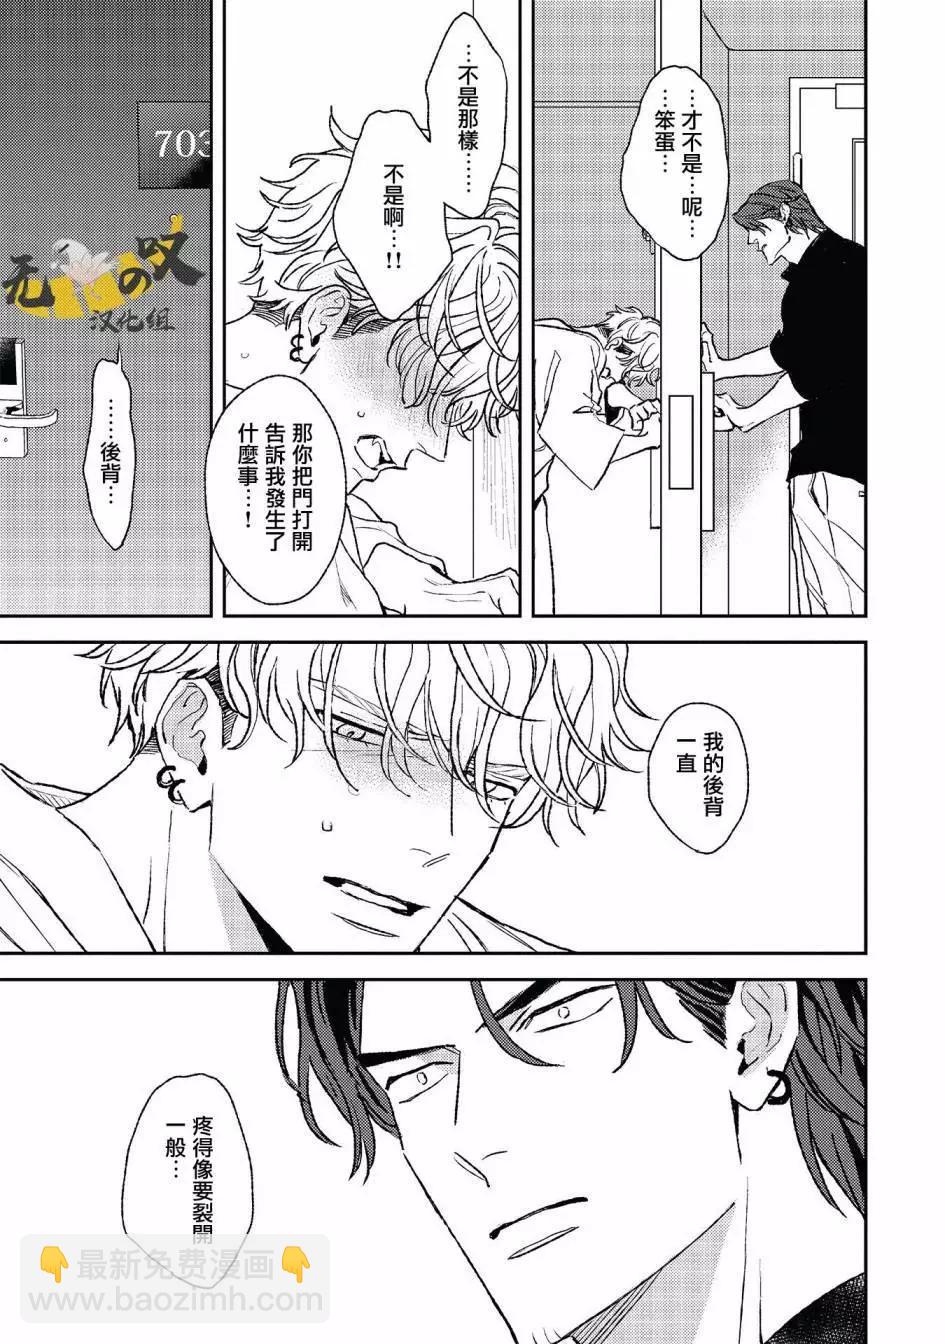 His Little Amber - 第04話 - 1